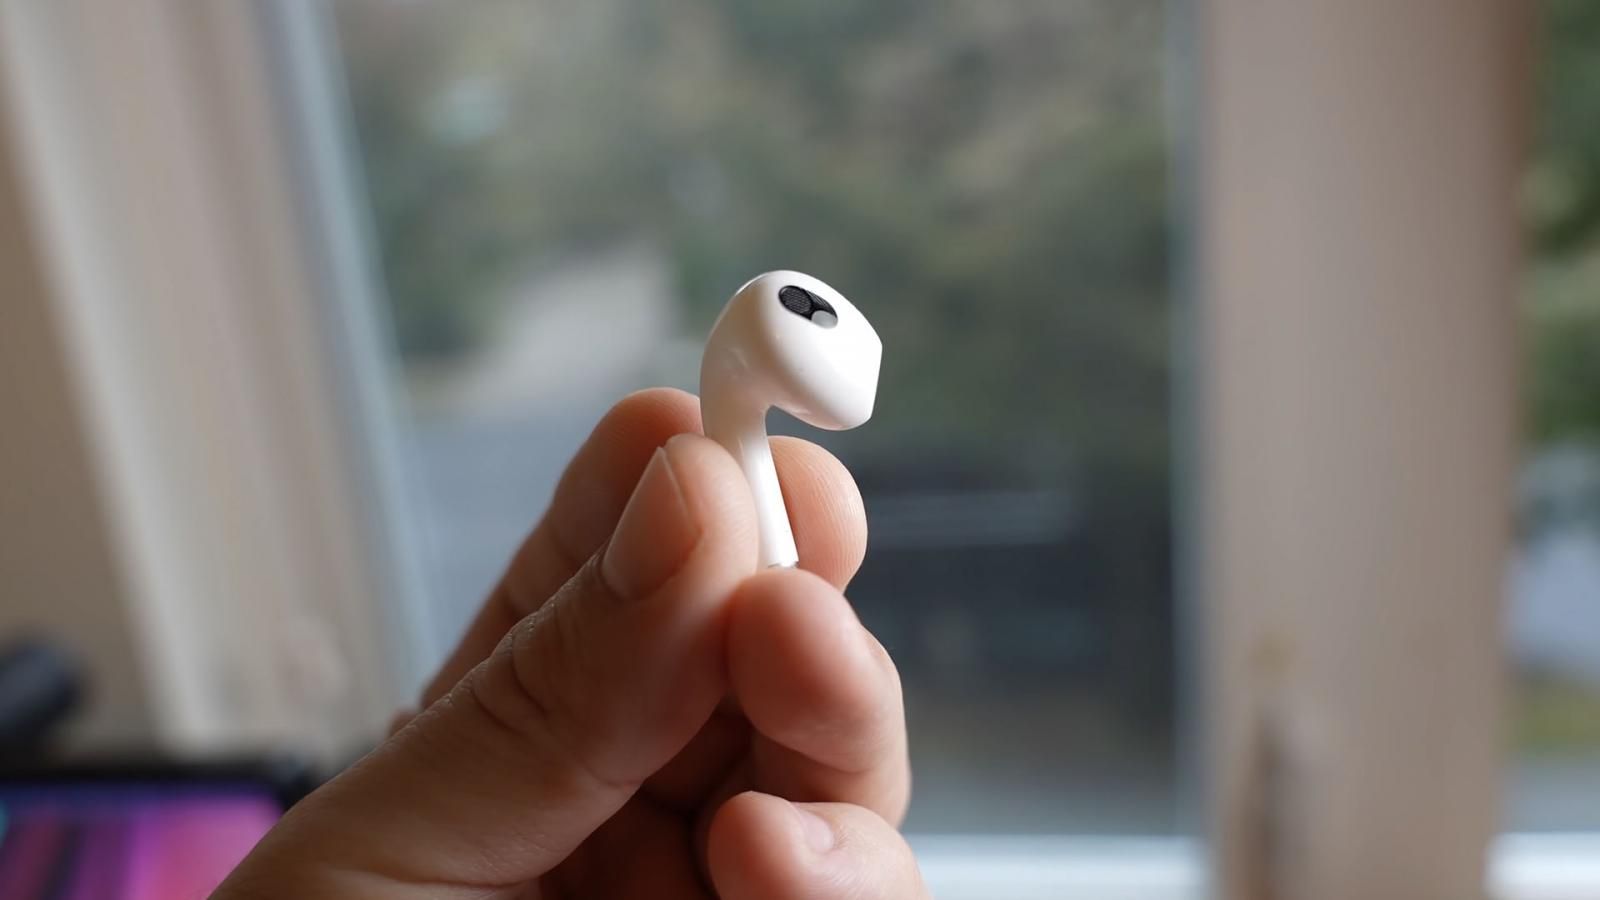 Earbud held in hand by the stem